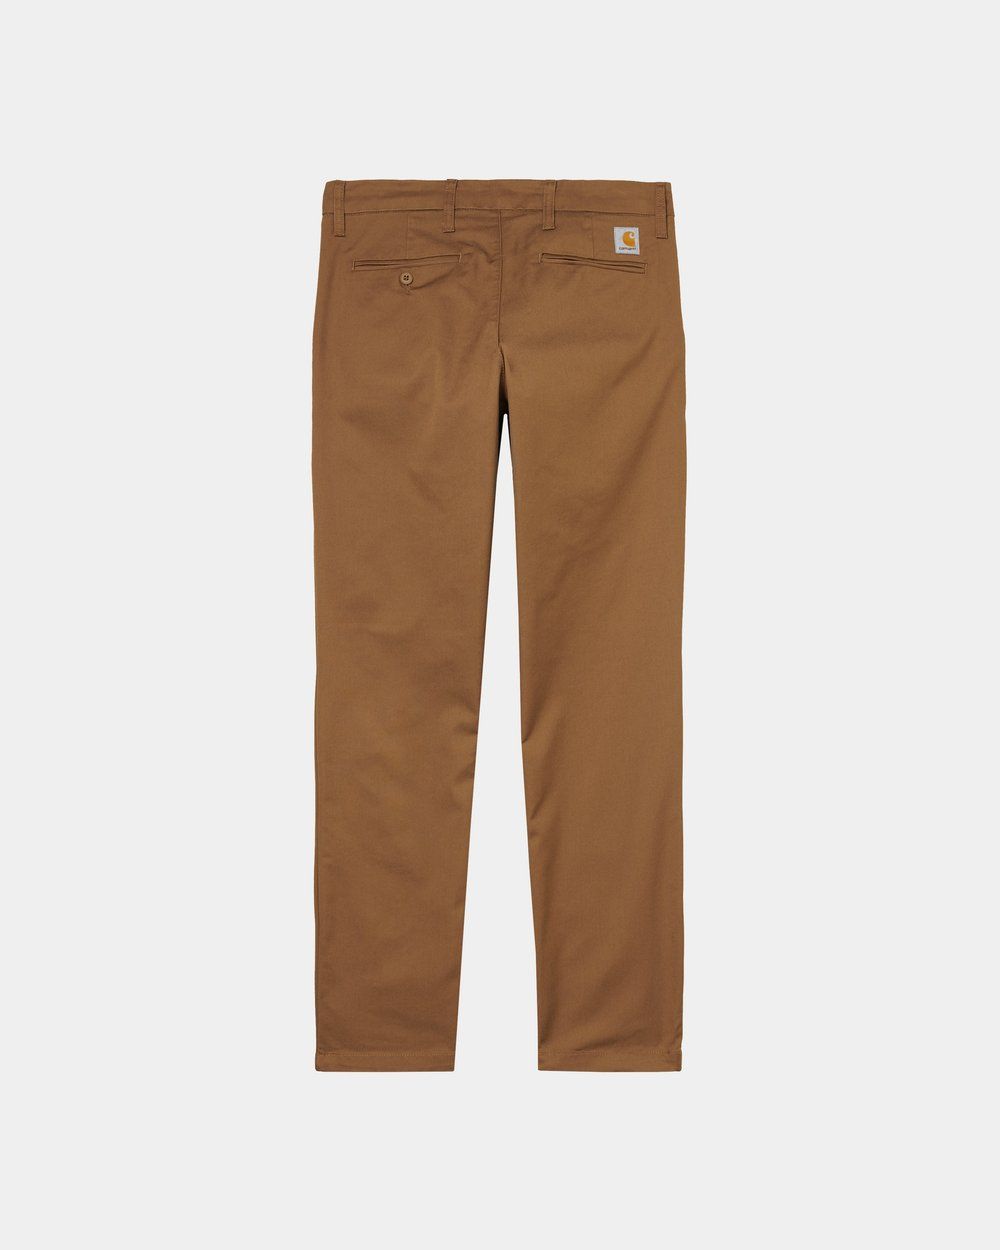 Product Image for Sid Pant, Hamilton Brown Rinsed